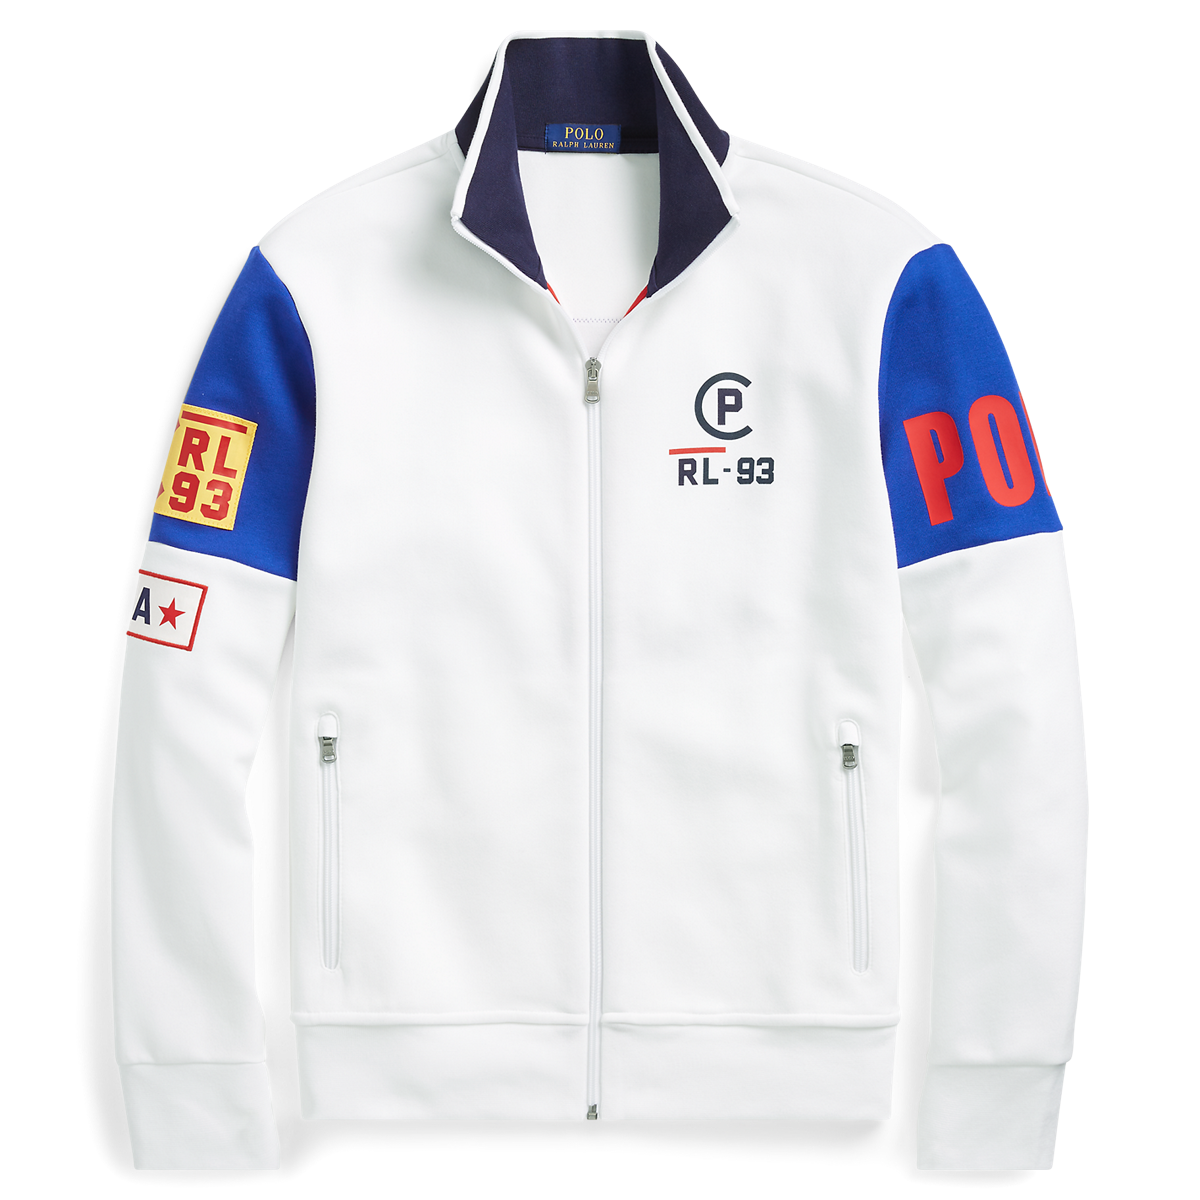 CP-93 Double-Knit Track Jacket